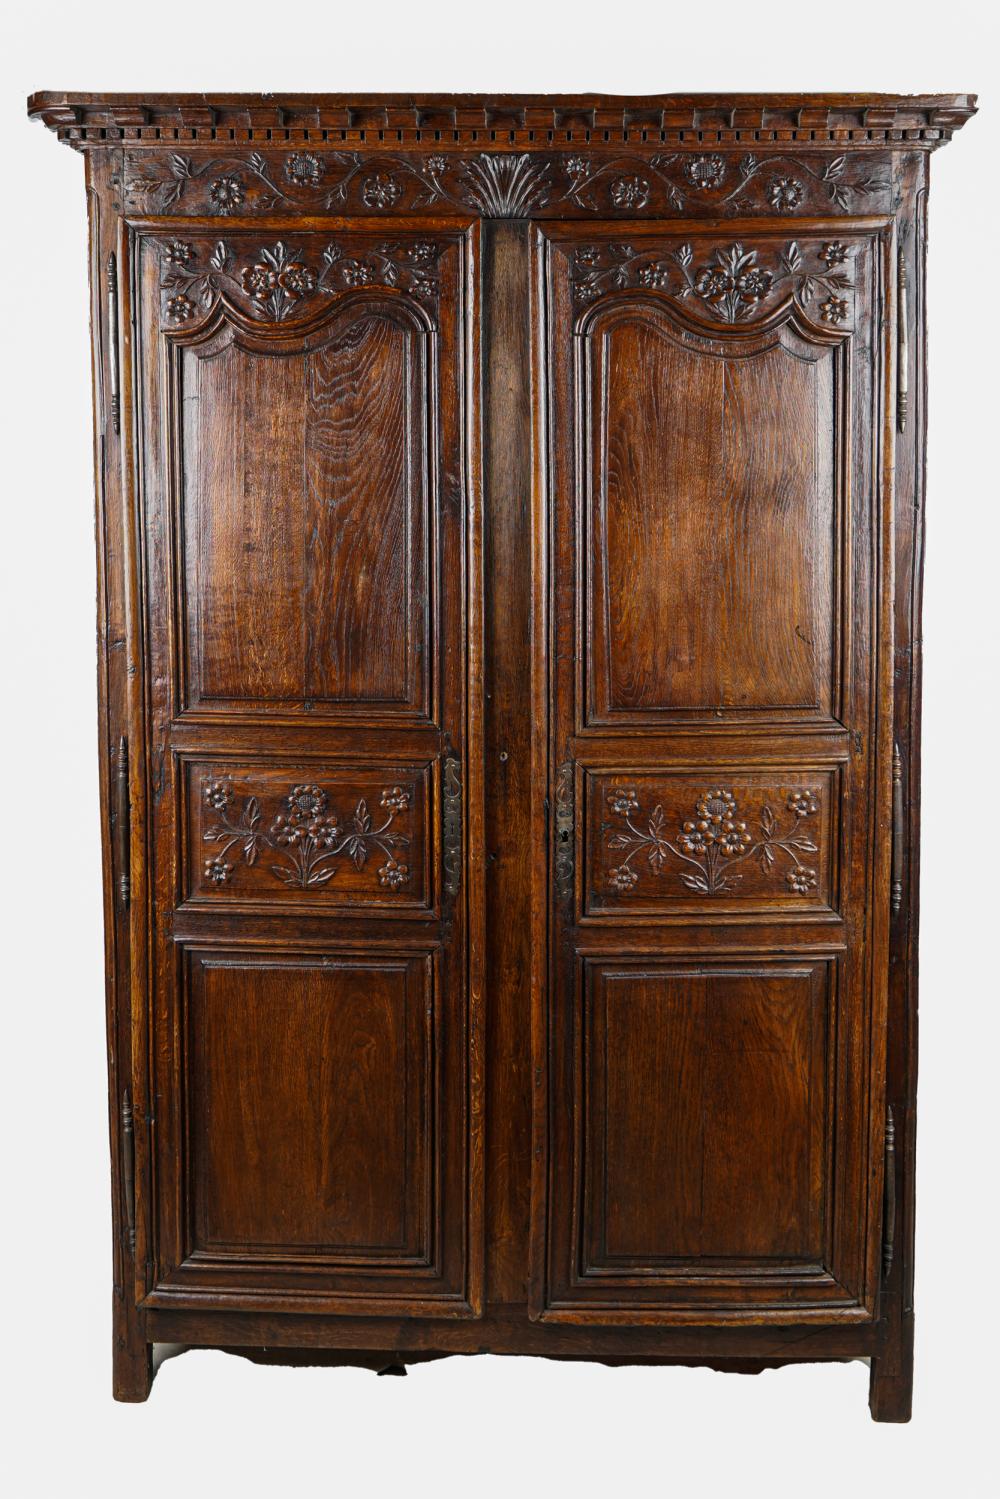 FRENCH PROVINCIALCARVED OAK ARMOIRElate 3372b8